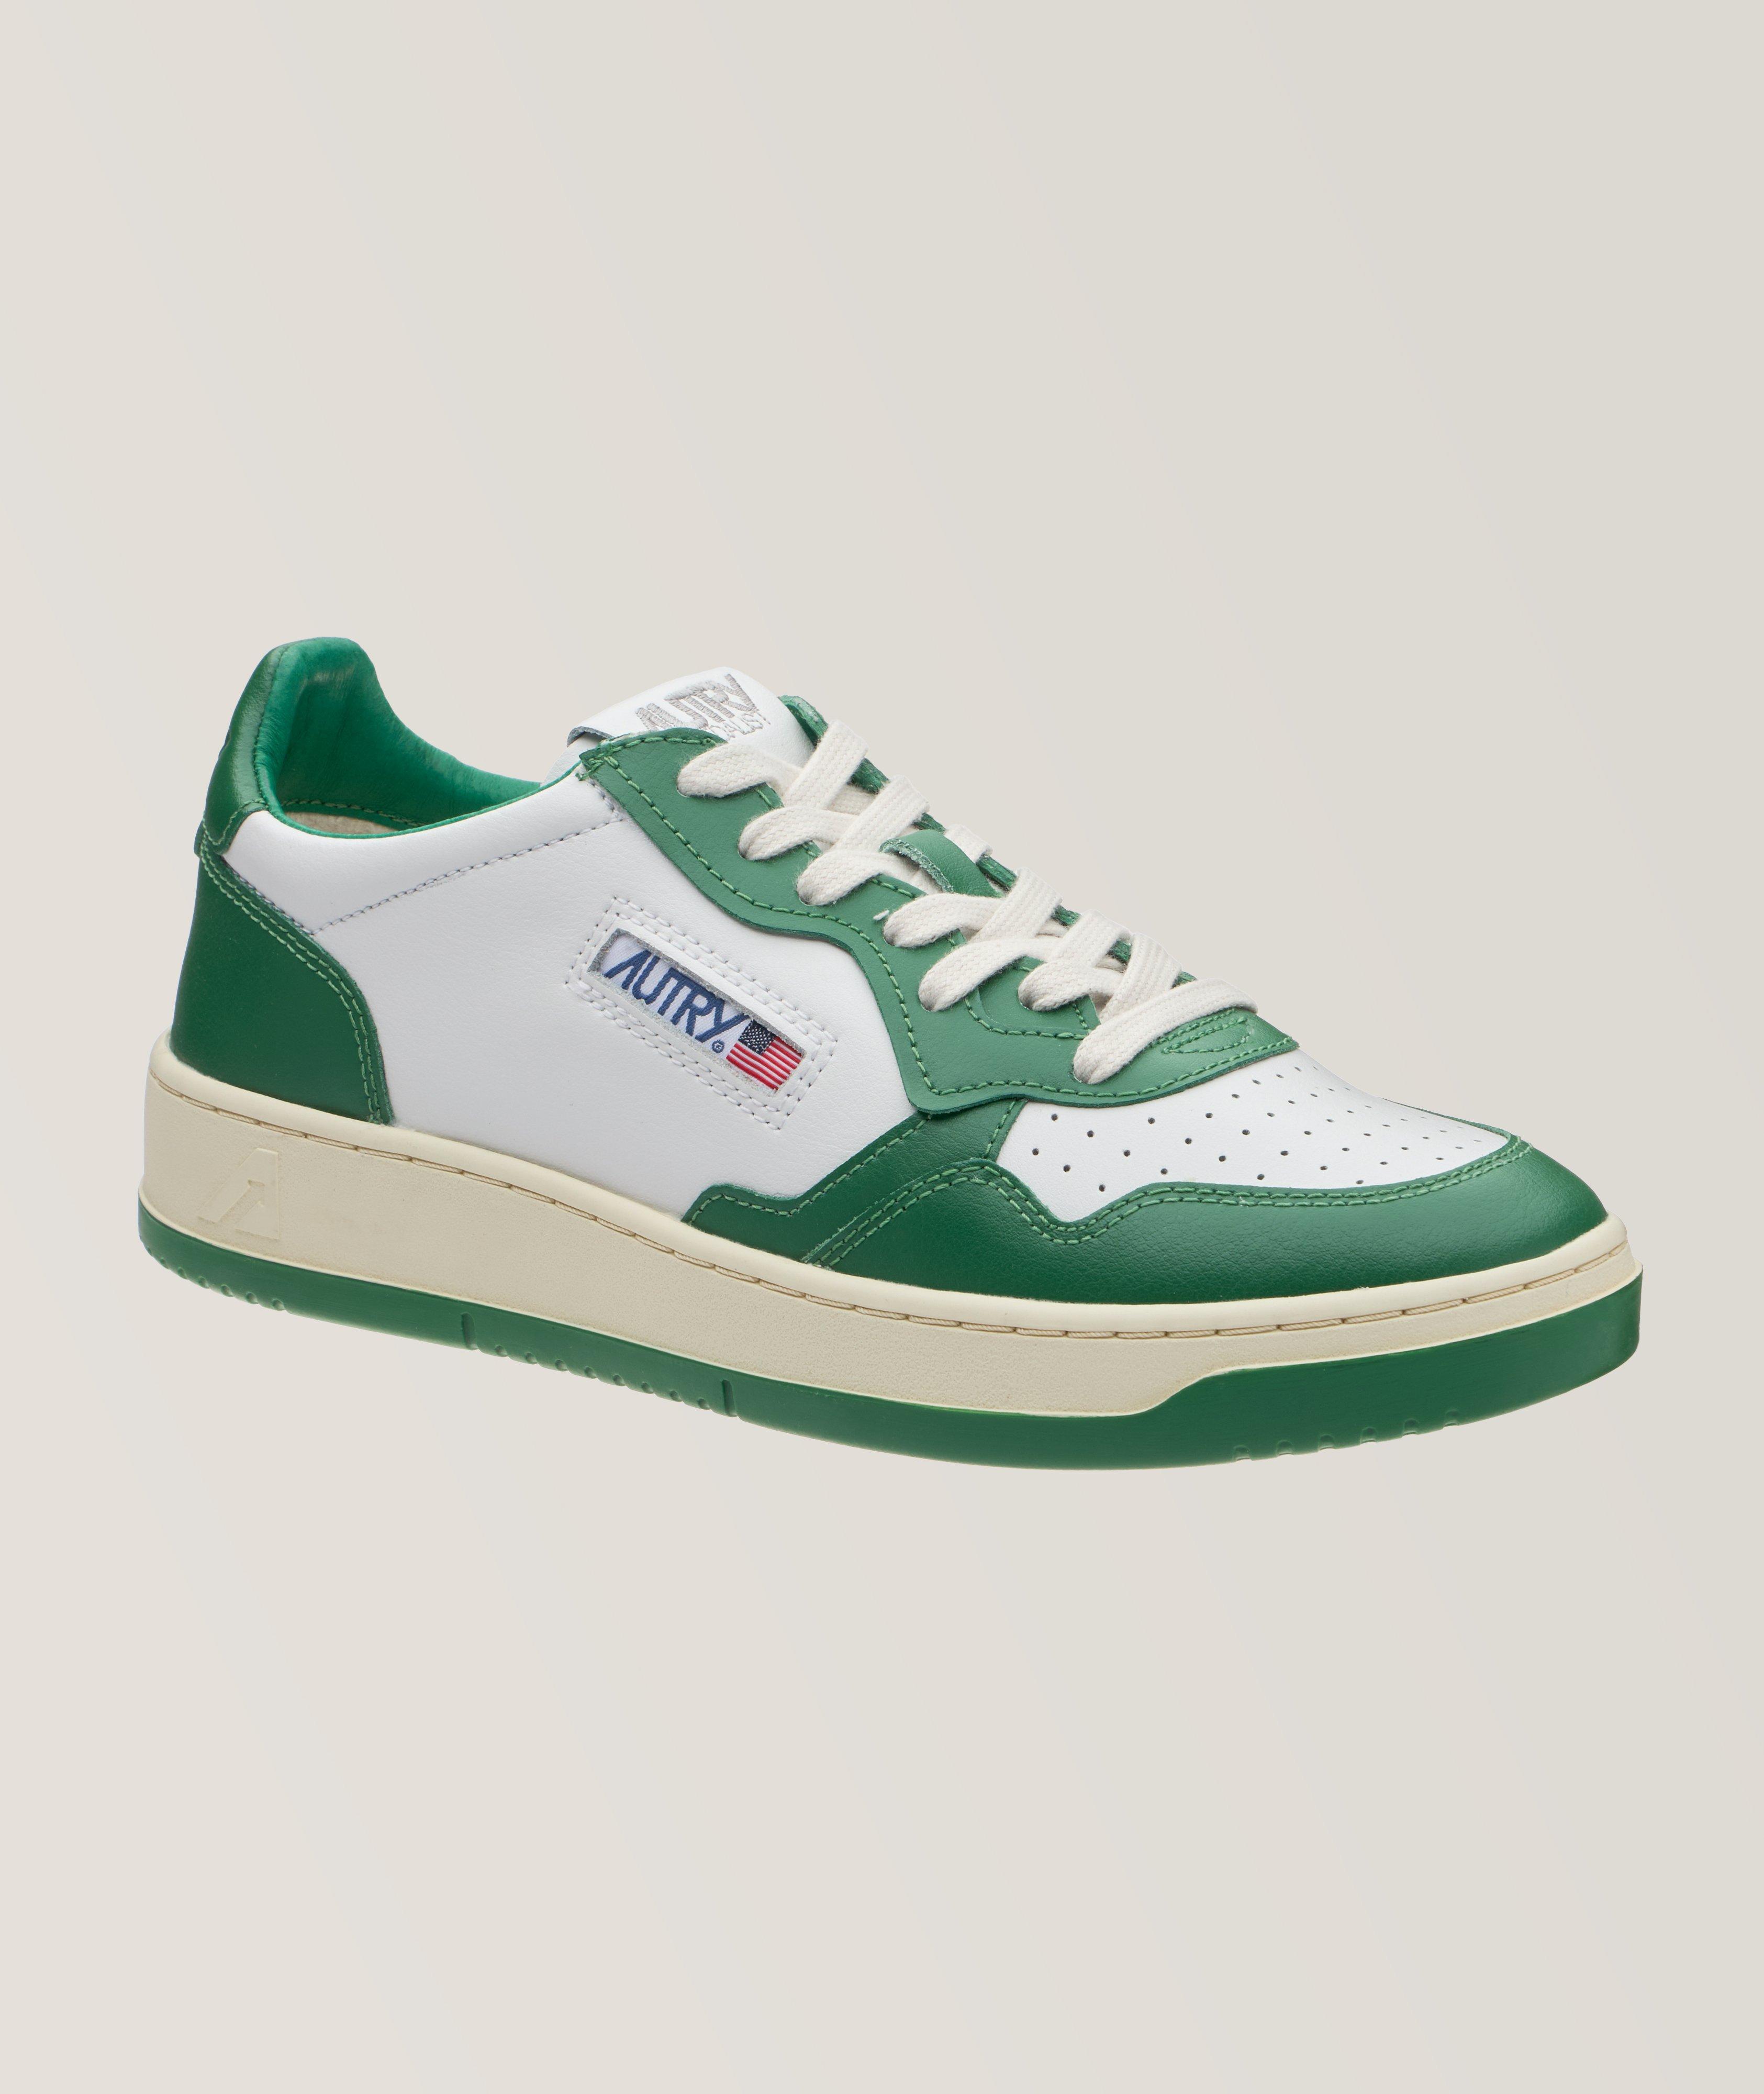 Medalist Leather Sneakers image 0